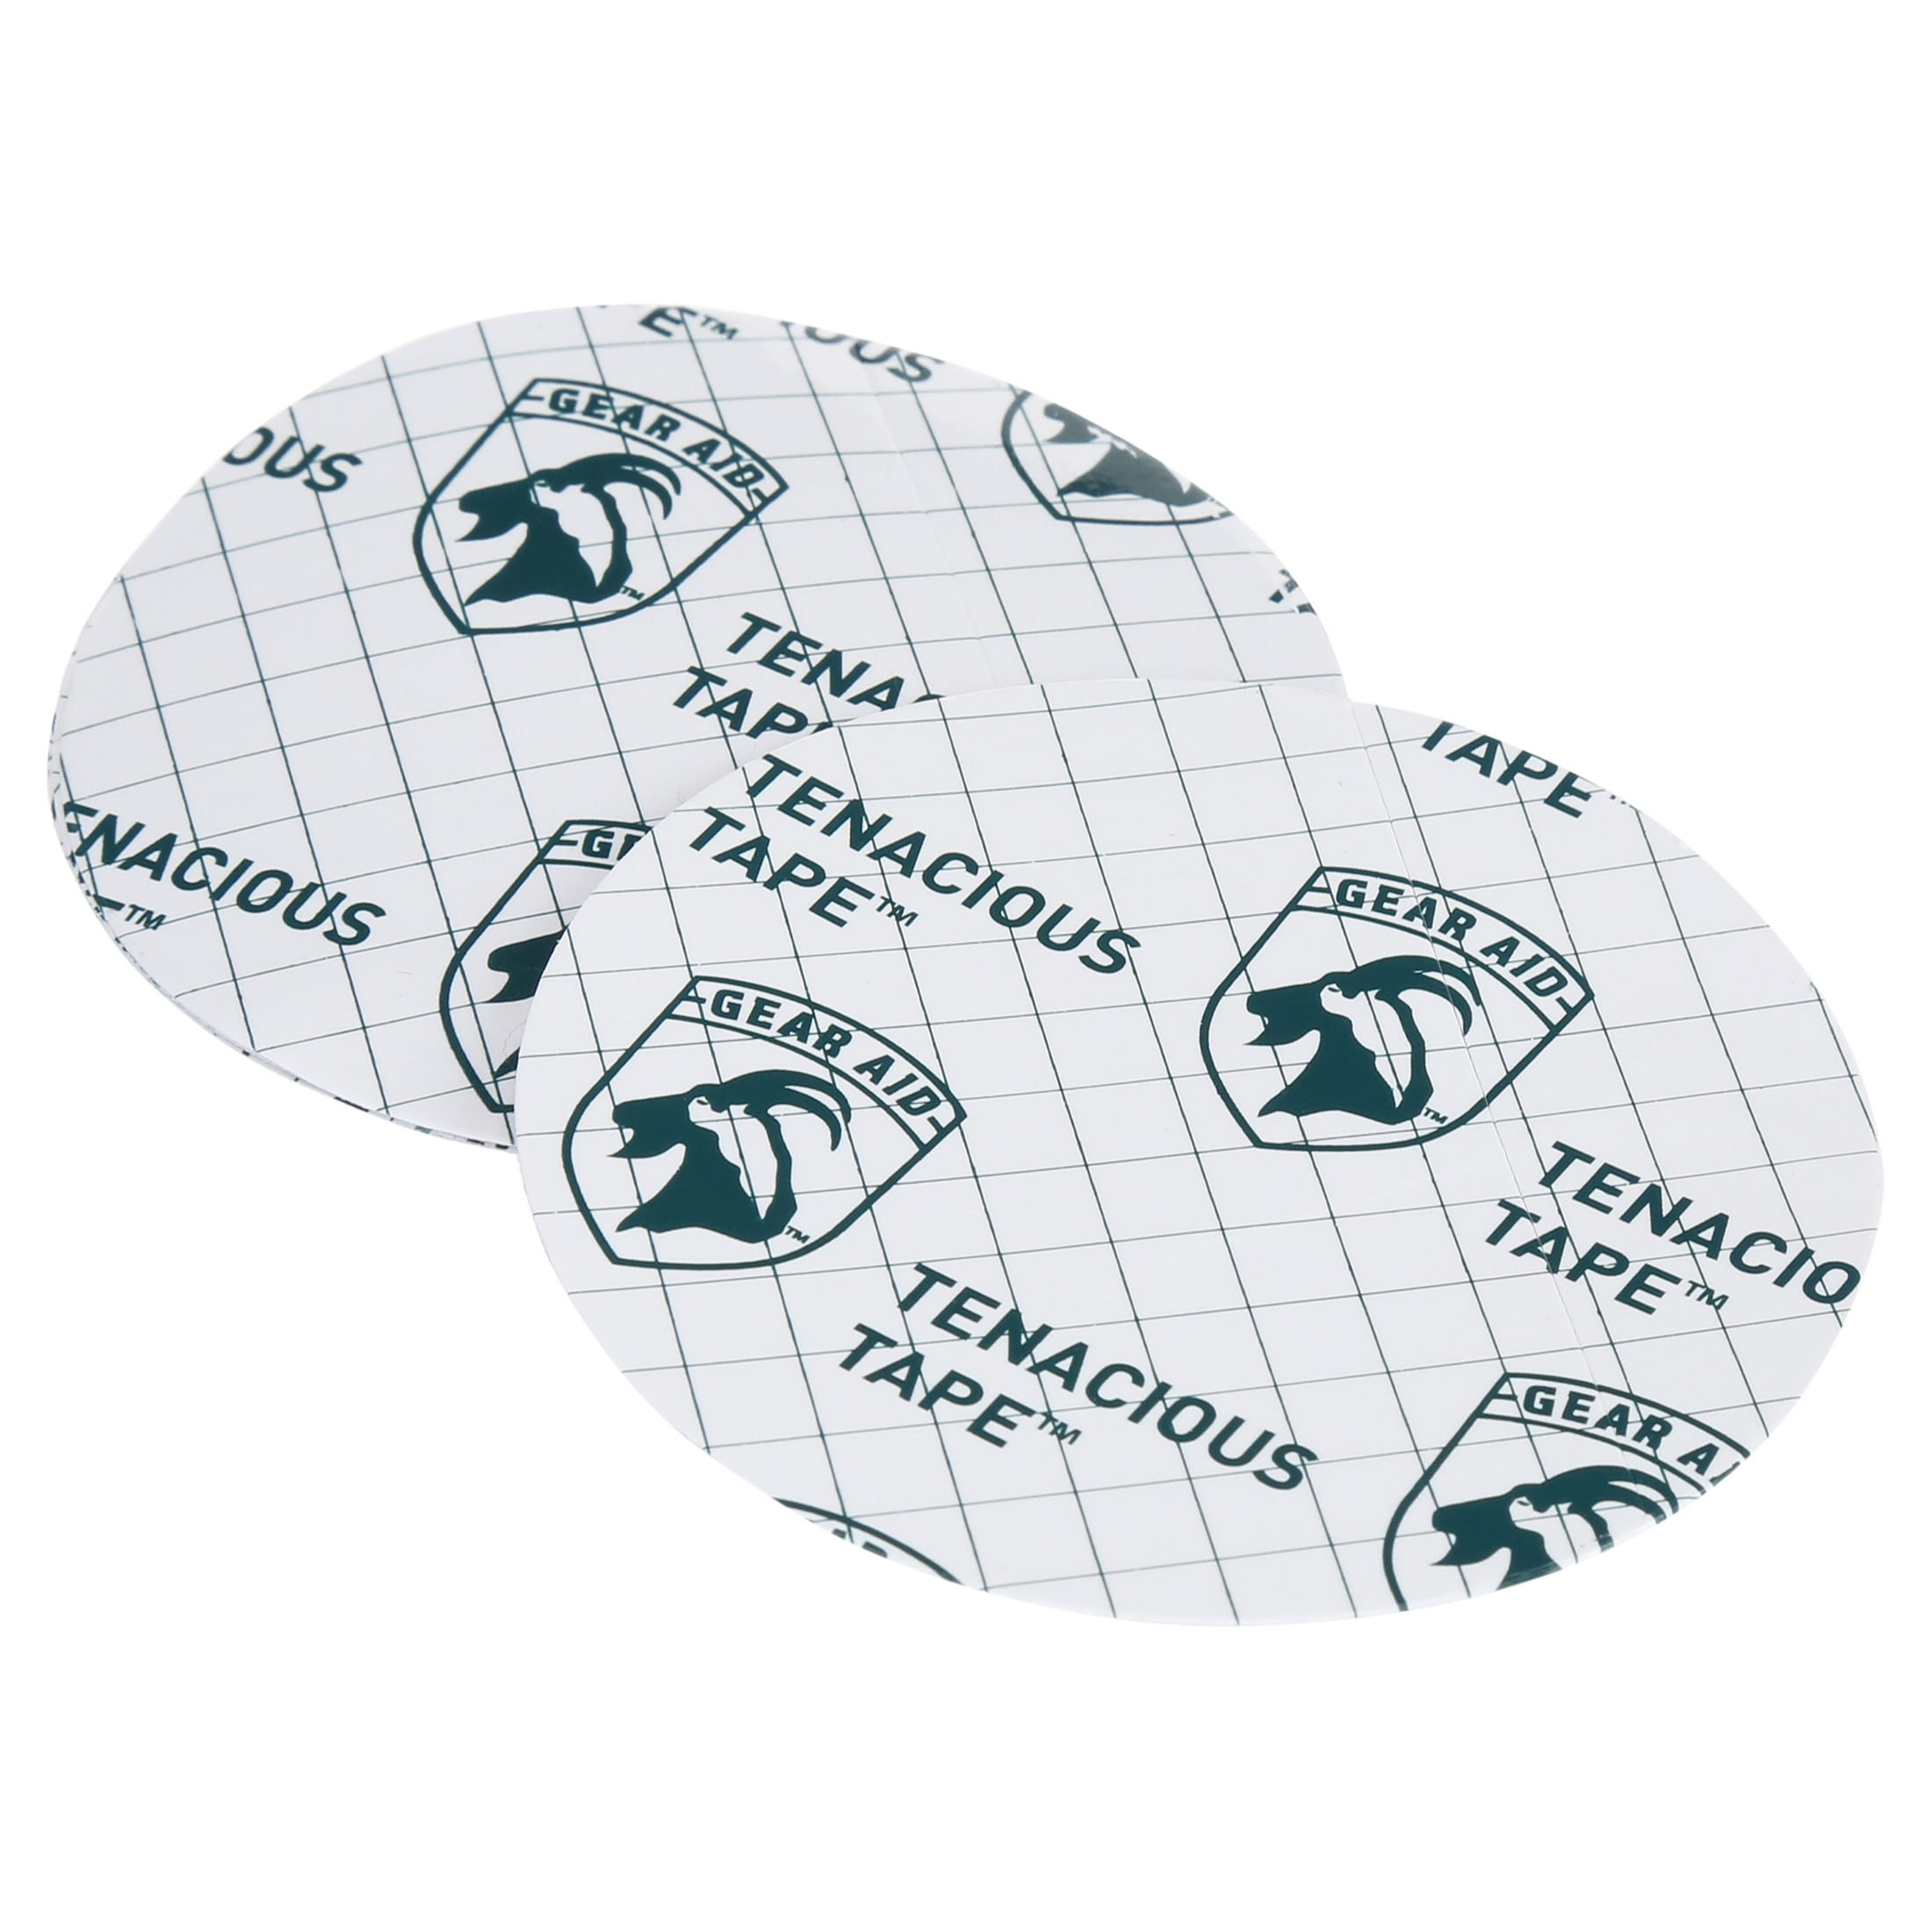 Shop Gear Aid Tenacious Tape online from Racer's Edge